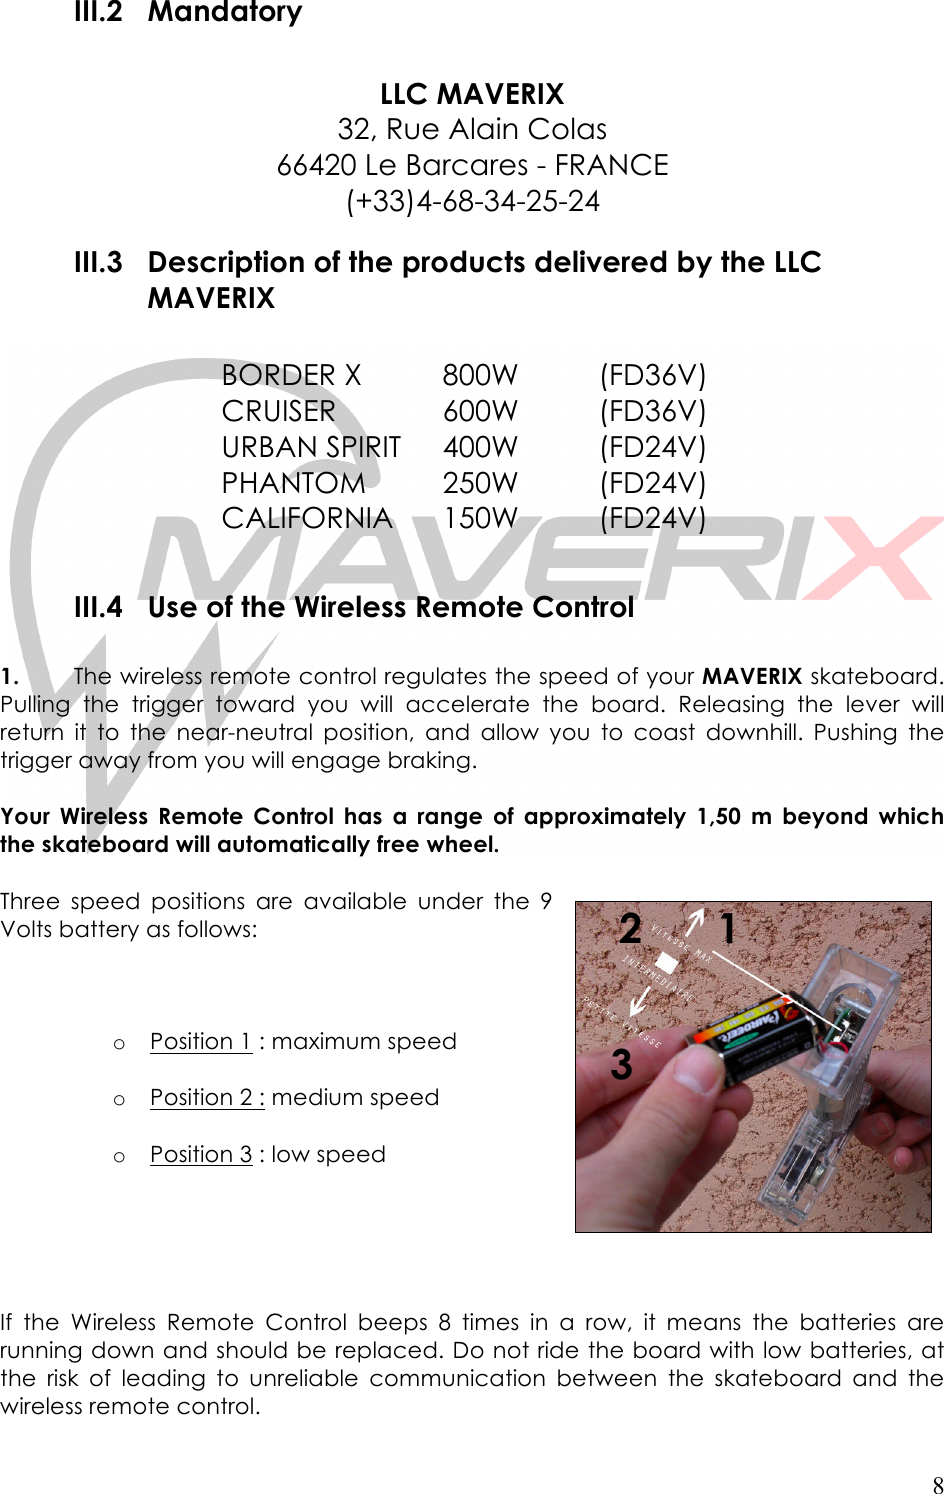   8 III.2 Mandatory  LLC MAVERIX 32, Rue Alain Colas 66420 Le Barcares - FRANCE (+33)4-68-34-25-24 III.3 Description of the products delivered by the LLC MAVERIX  BORDER X  800W    (FD36V) CRUISER     600W    (FD36V) URBAN SPIRIT  400W    (FD24V) PHANTOM  250W    (FD24V) CALIFORNIA  150W    (FD24V)      III.4 Use of the Wireless Remote Control   1. The wireless remote control regulates the speed of your MAVERIX skateboard. Pulling  the  trigger  toward  you  will  accelerate  the  board.  Releasing  the  lever  will return  it  to  the  near-neutral position,  and  allow  you  to  coast  downhill.  Pushing  the trigger away from you will engage braking.   Your  Wireless  Remote  Control  has  a  range  of  approximately  1,50  m  beyond  which the skateboard will automatically free wheel.   Three speed  positions  are  available under  the  9 Volts battery as follows:    o Position 1 : maximum speed  o Position 2 : medium speed  o Position 3 : low speed      If  the  Wireless  Remote  Control  beeps  8  times  in  a  row,  it  means  the  batteries  are running down and should be replaced. Do not ride the board with low batteries, at the  risk  of  leading  to  unreliable  communication between  the  skateboard  and  the wireless remote control.  1 3 2 